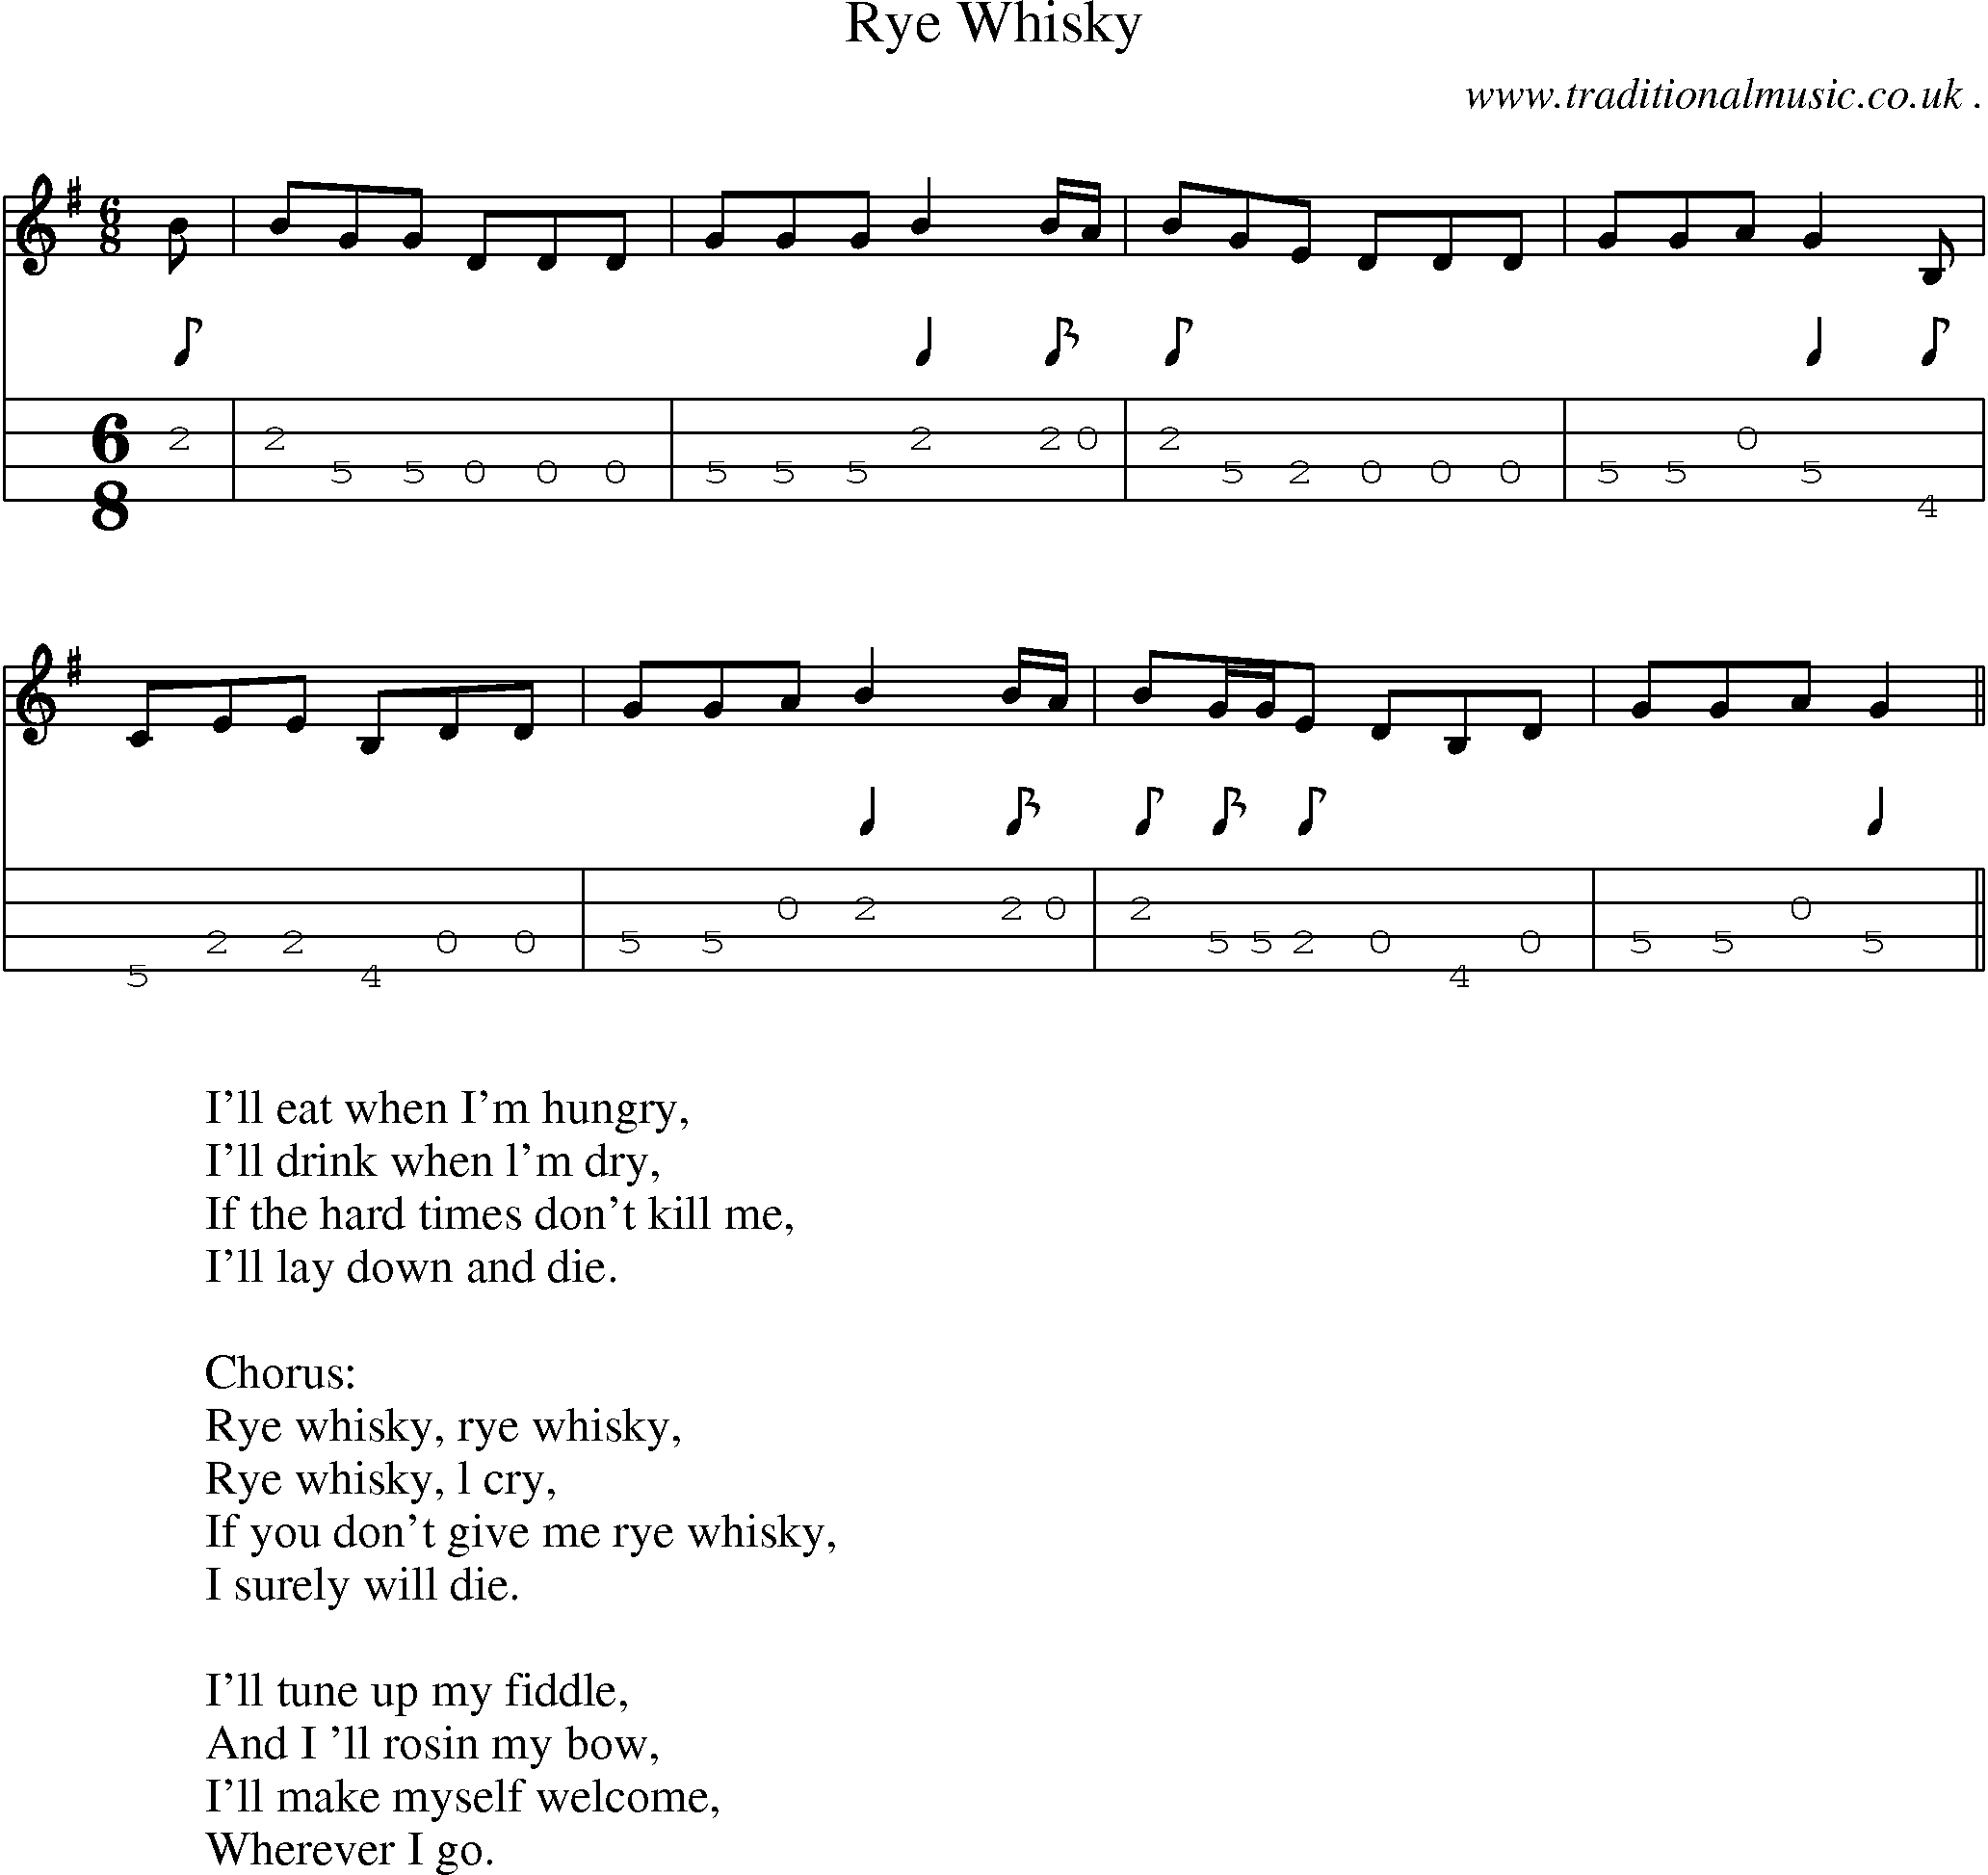 Music Score and Guitar Tabs for Rye Whisky